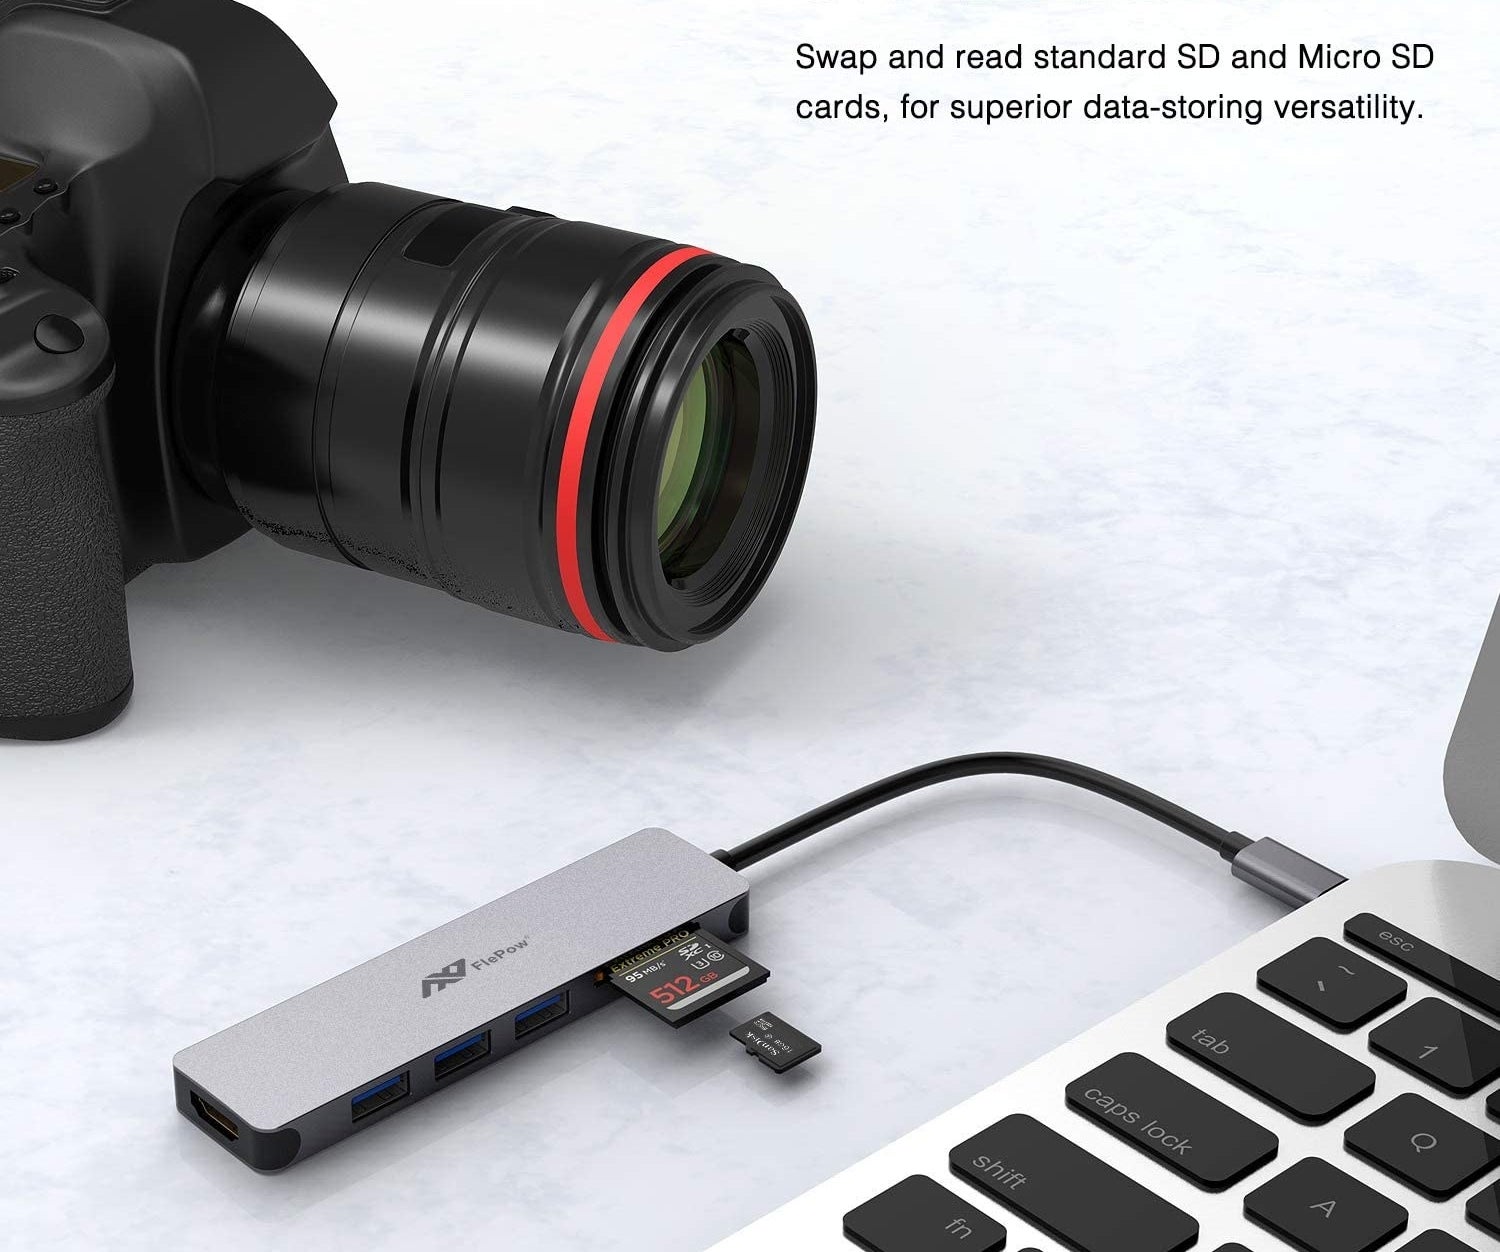 adapter connected into a laptop with an SD card in it next to a camera